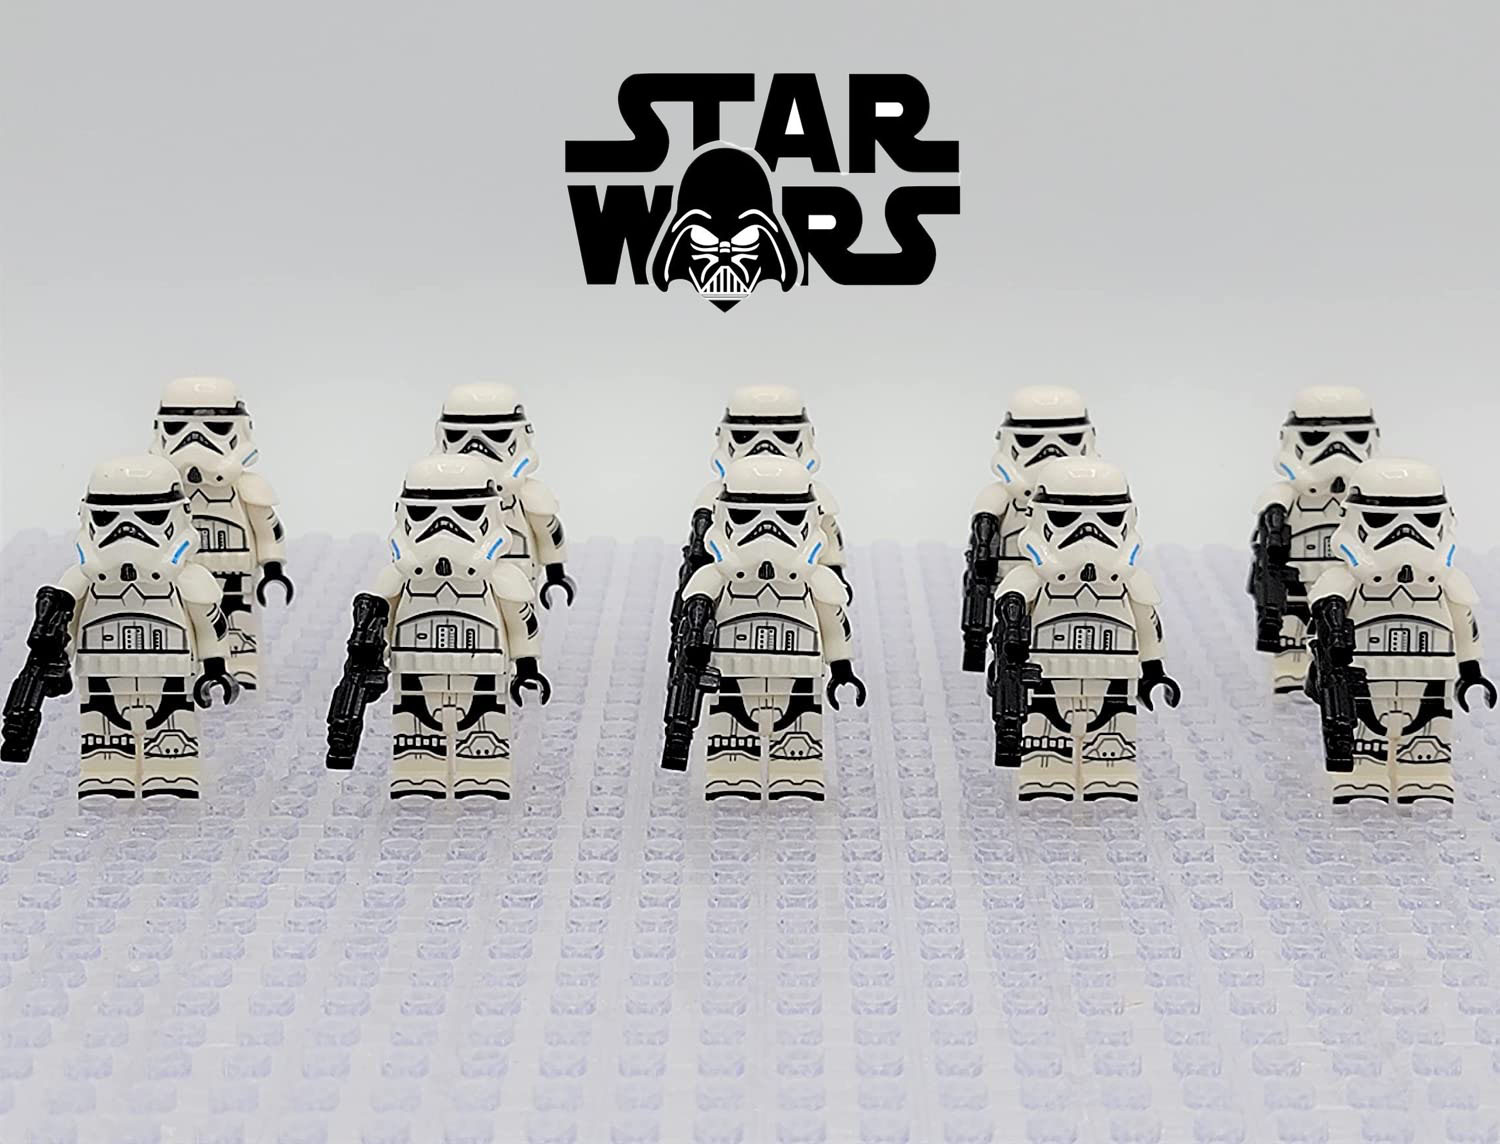 Star Wars Imperial Stormtroopers Army Set 10 Minifigure Building Blocks Toys